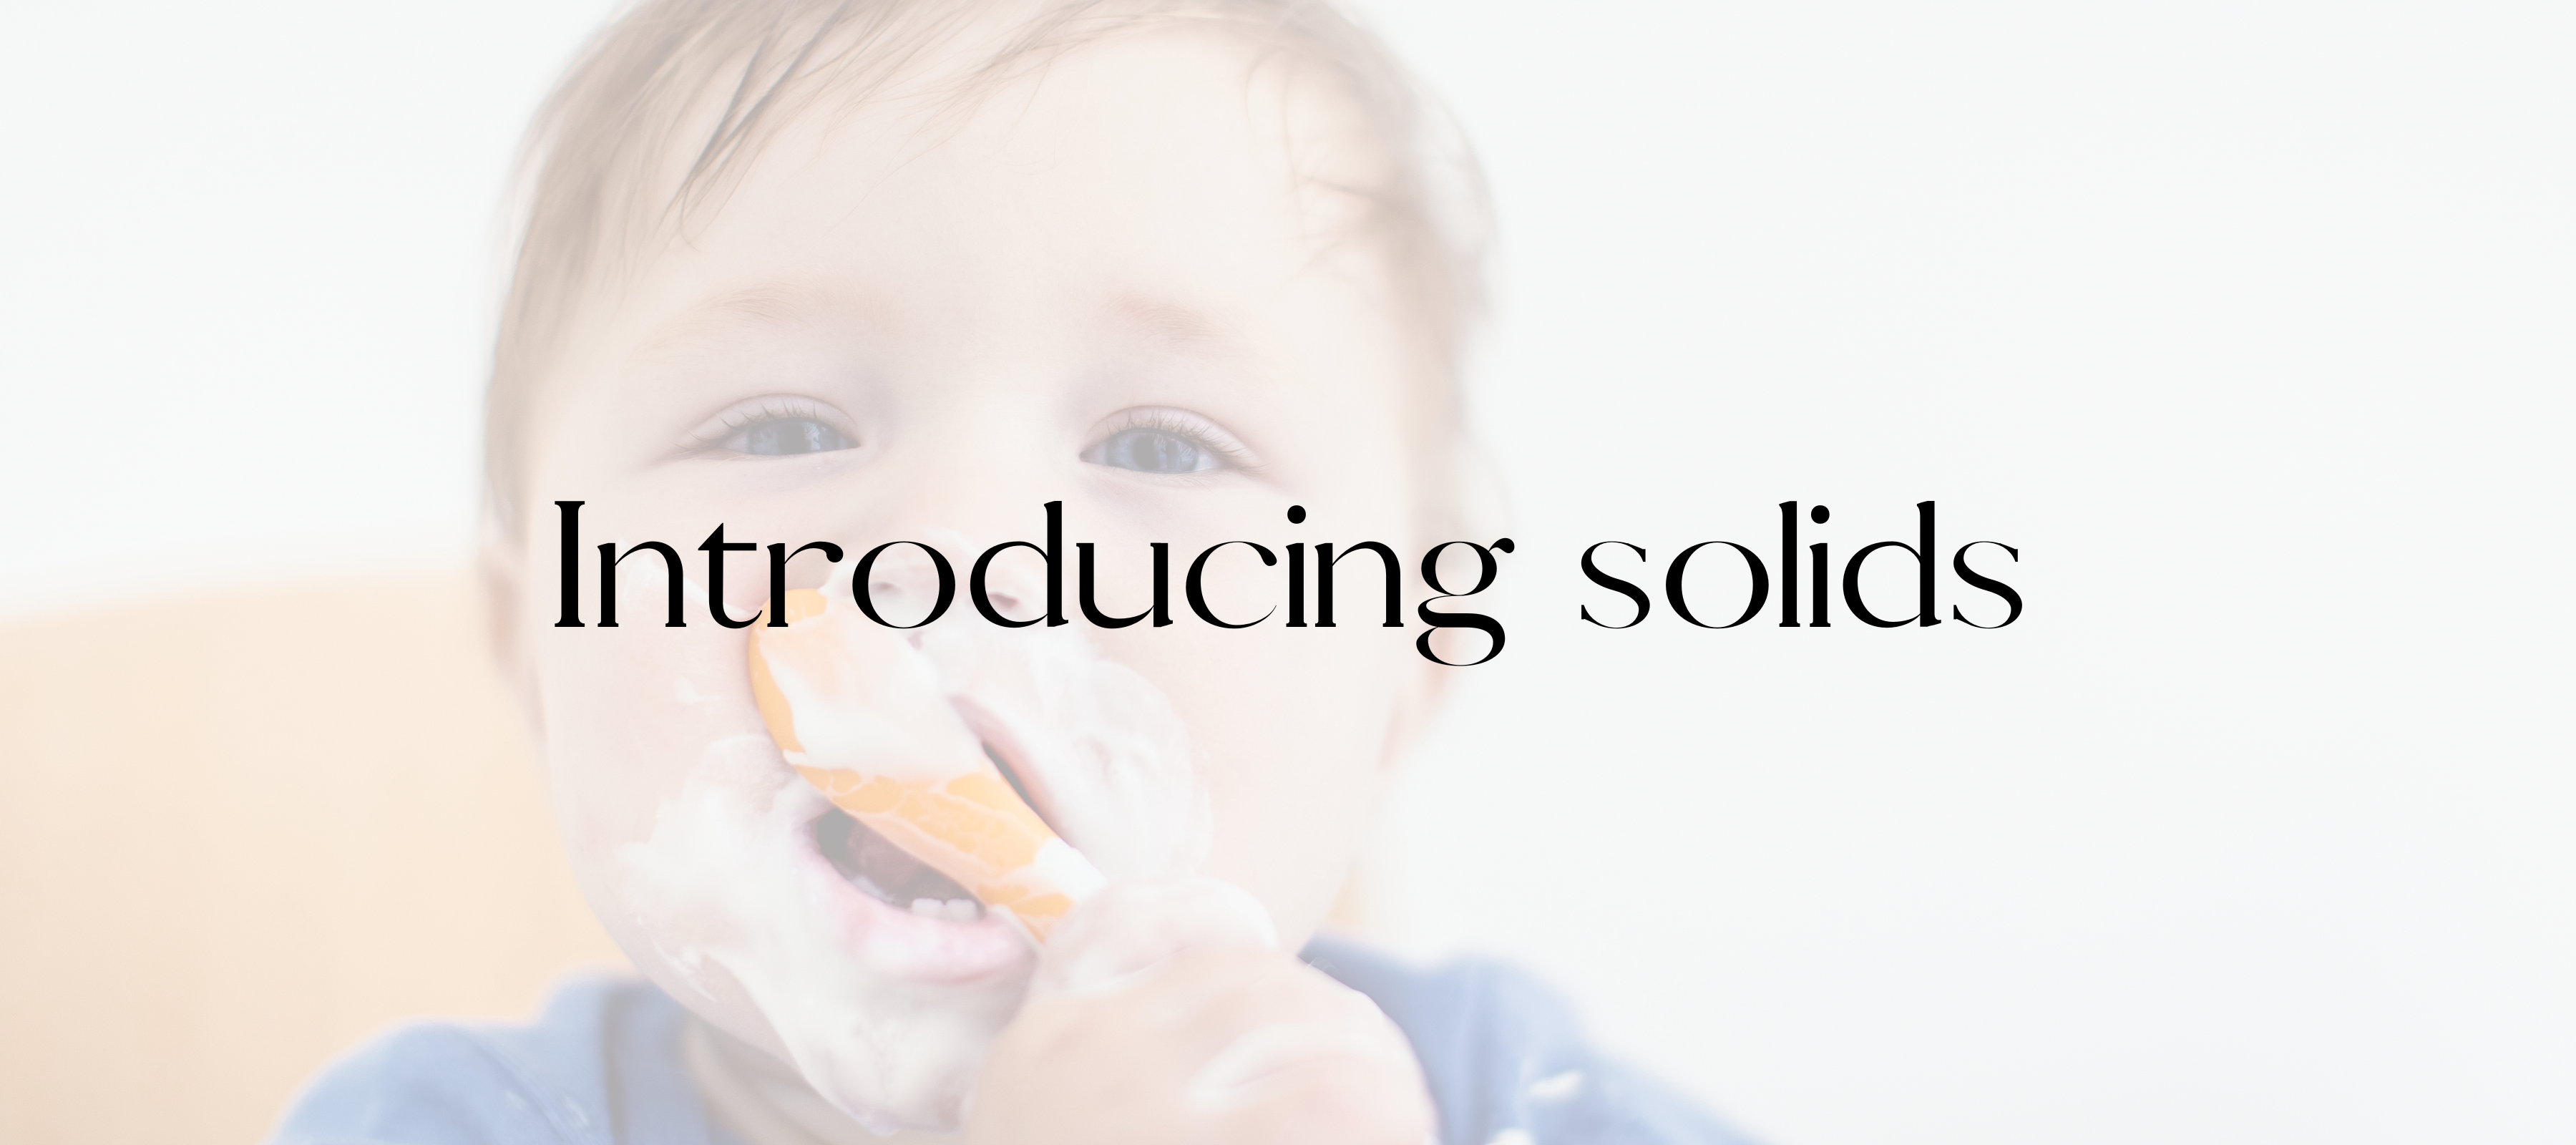 Introducing solids